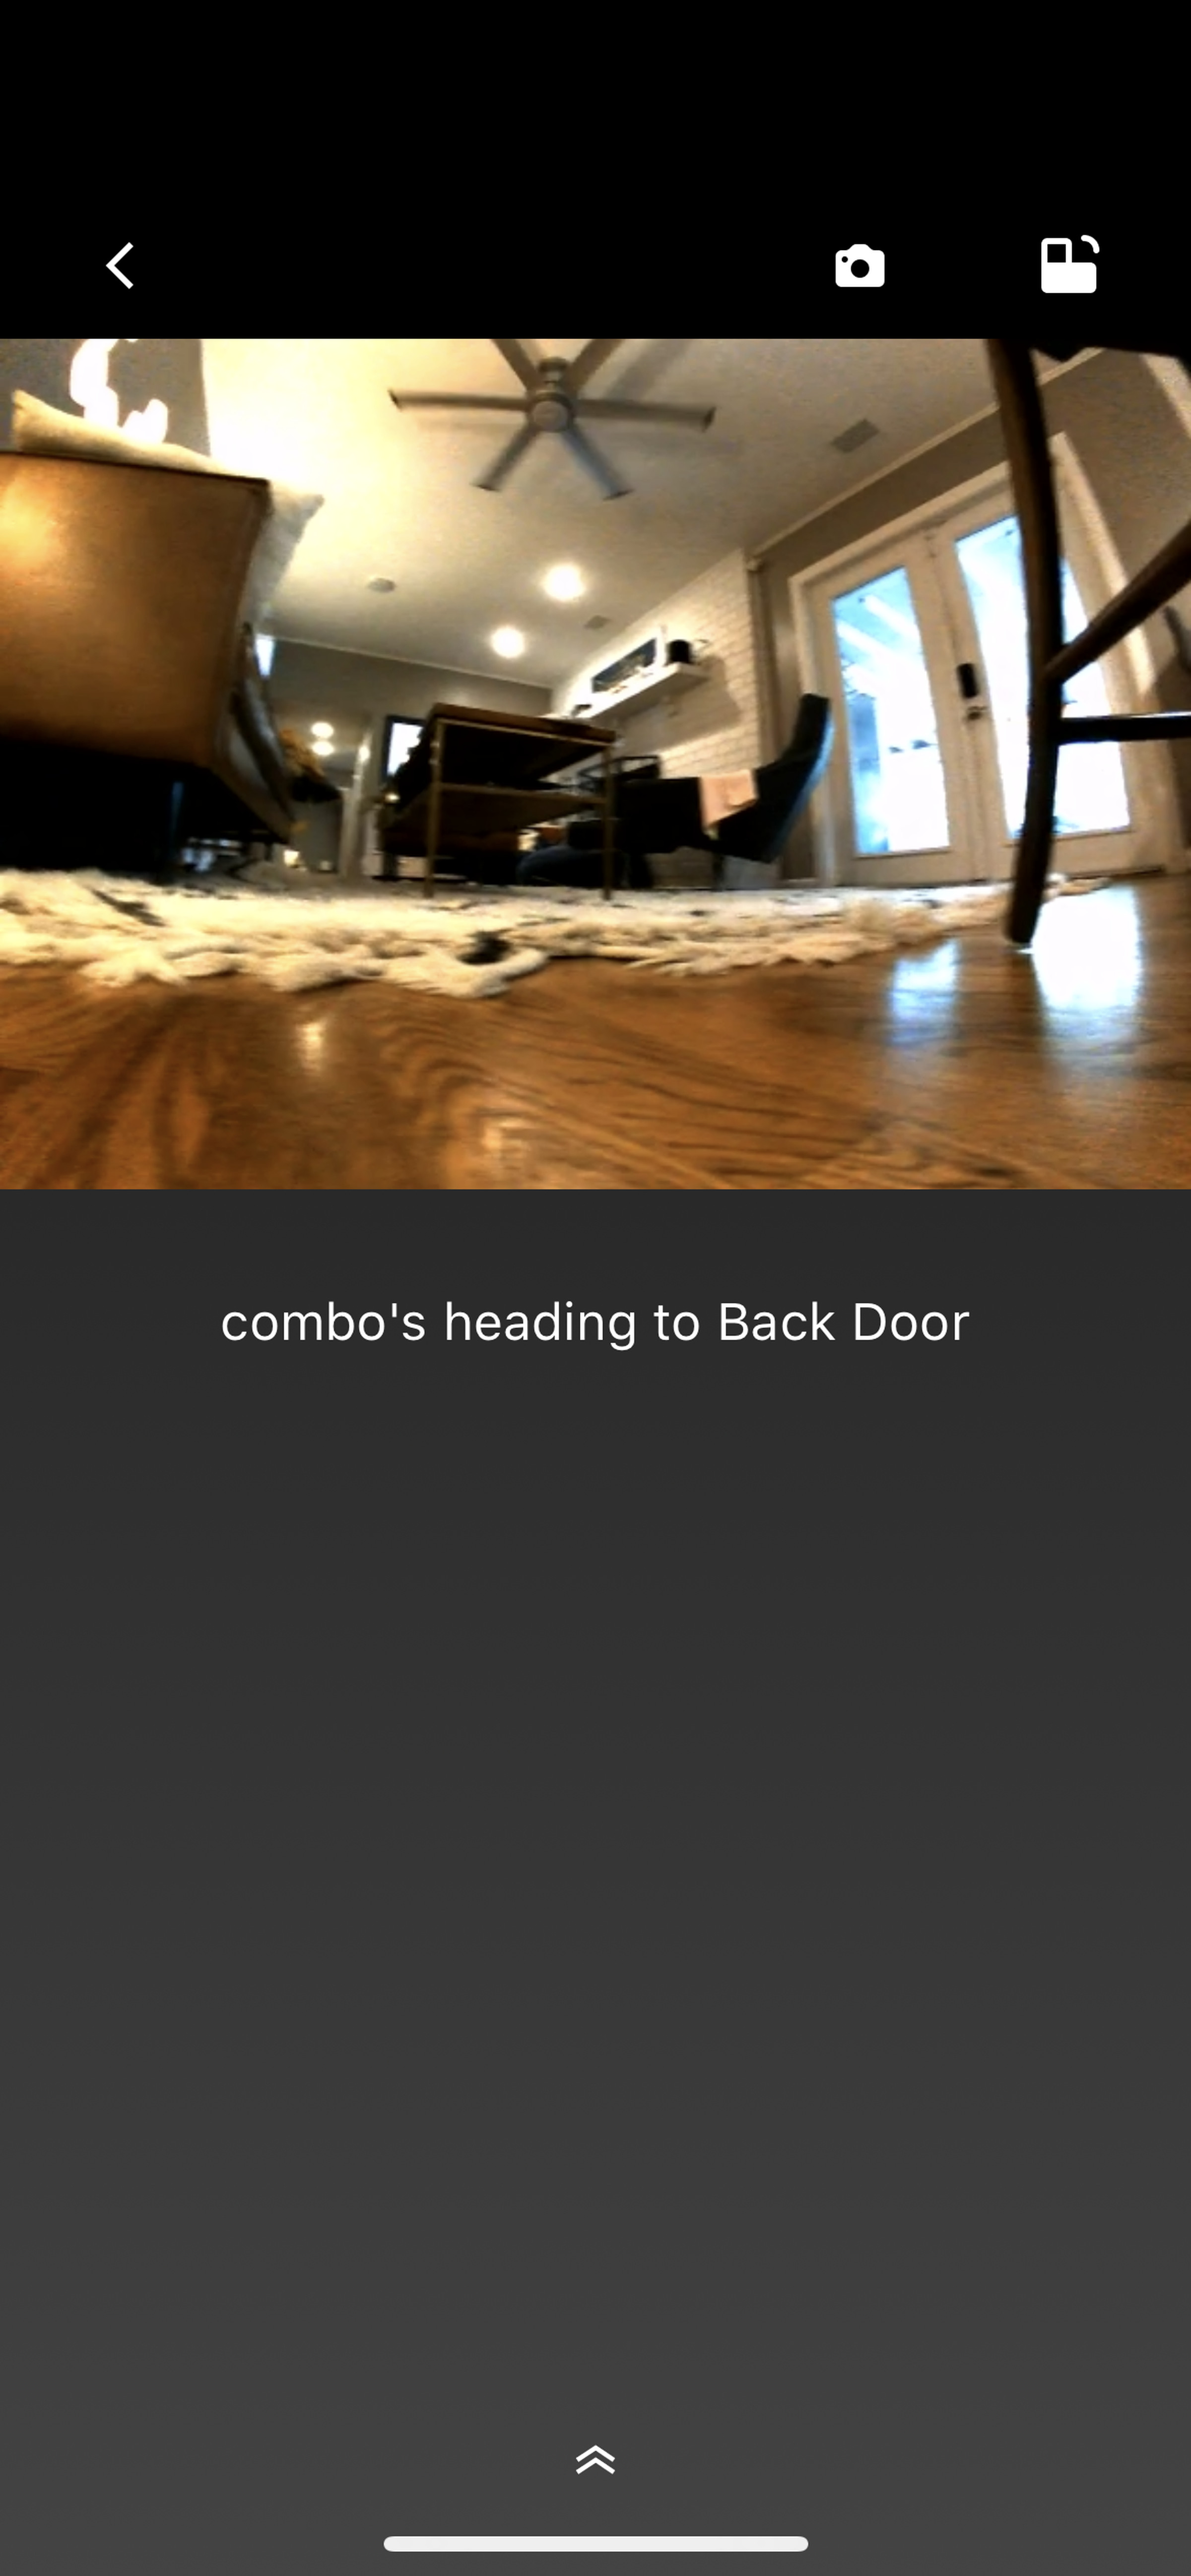 <em>The view from the Roomba j7 camera.</em>